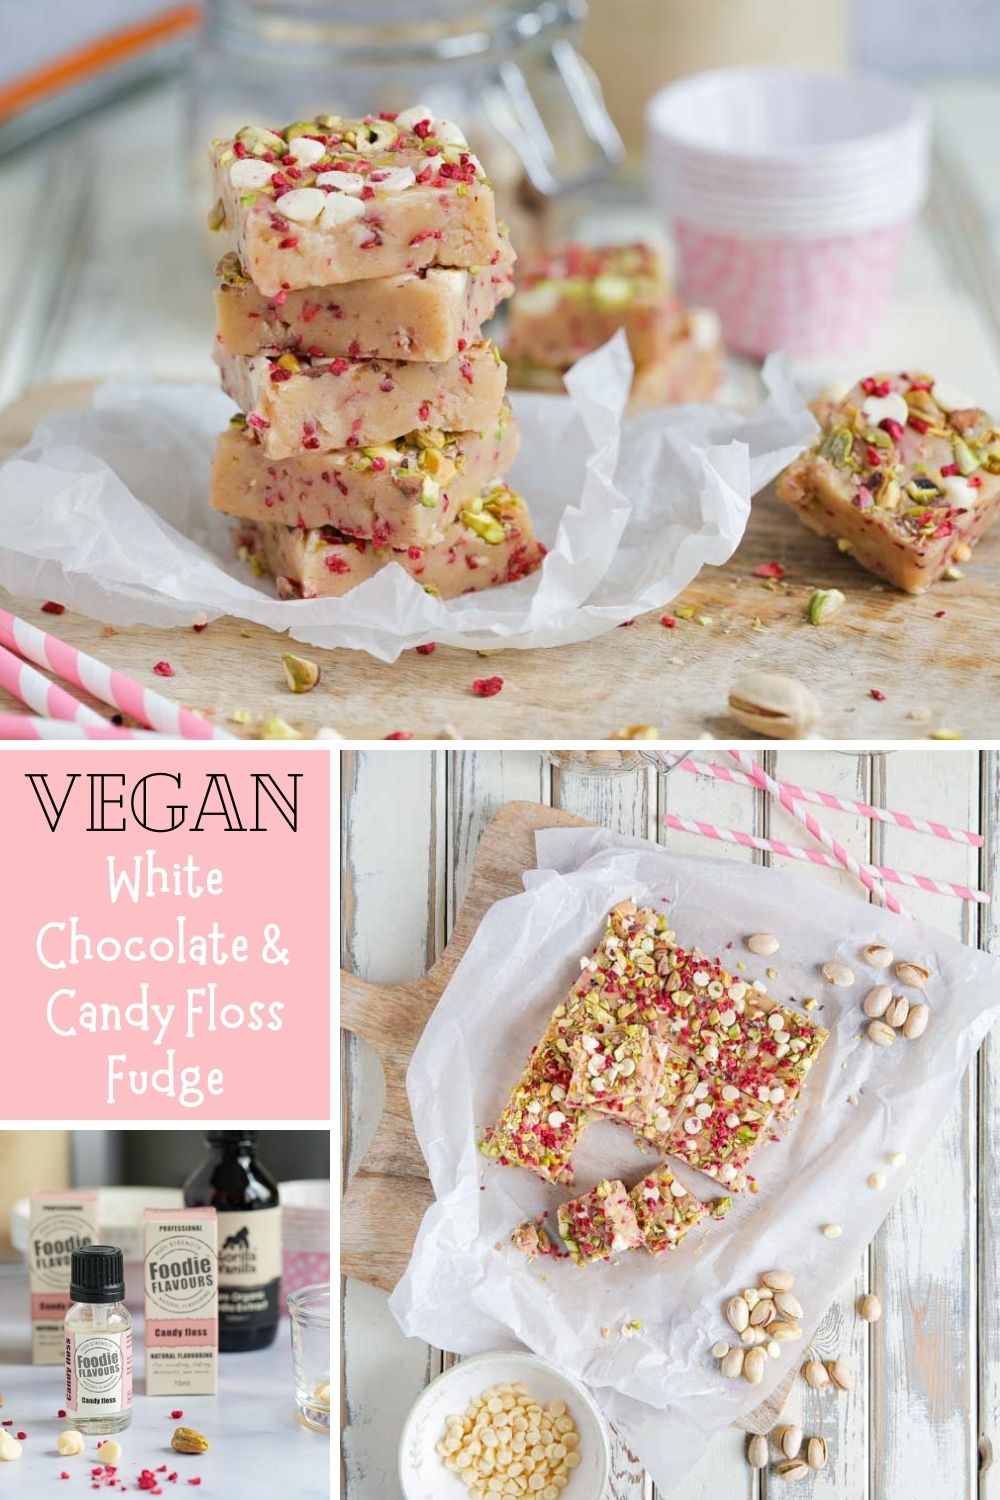 Super easy vegan candy floss fudge! Sprinkled with raspberry pieces, chopped pistachios and vegan white chocolate chips. A divinely sweet treat for yourself or wrapped in some pretty waxed paper for a special homemade gift! Recipe on thecookandhim.com #fudge #veganfudge #veganchocolate #veganchocolatefudge #easyfudge #whitechocolatefudge #candyfloss